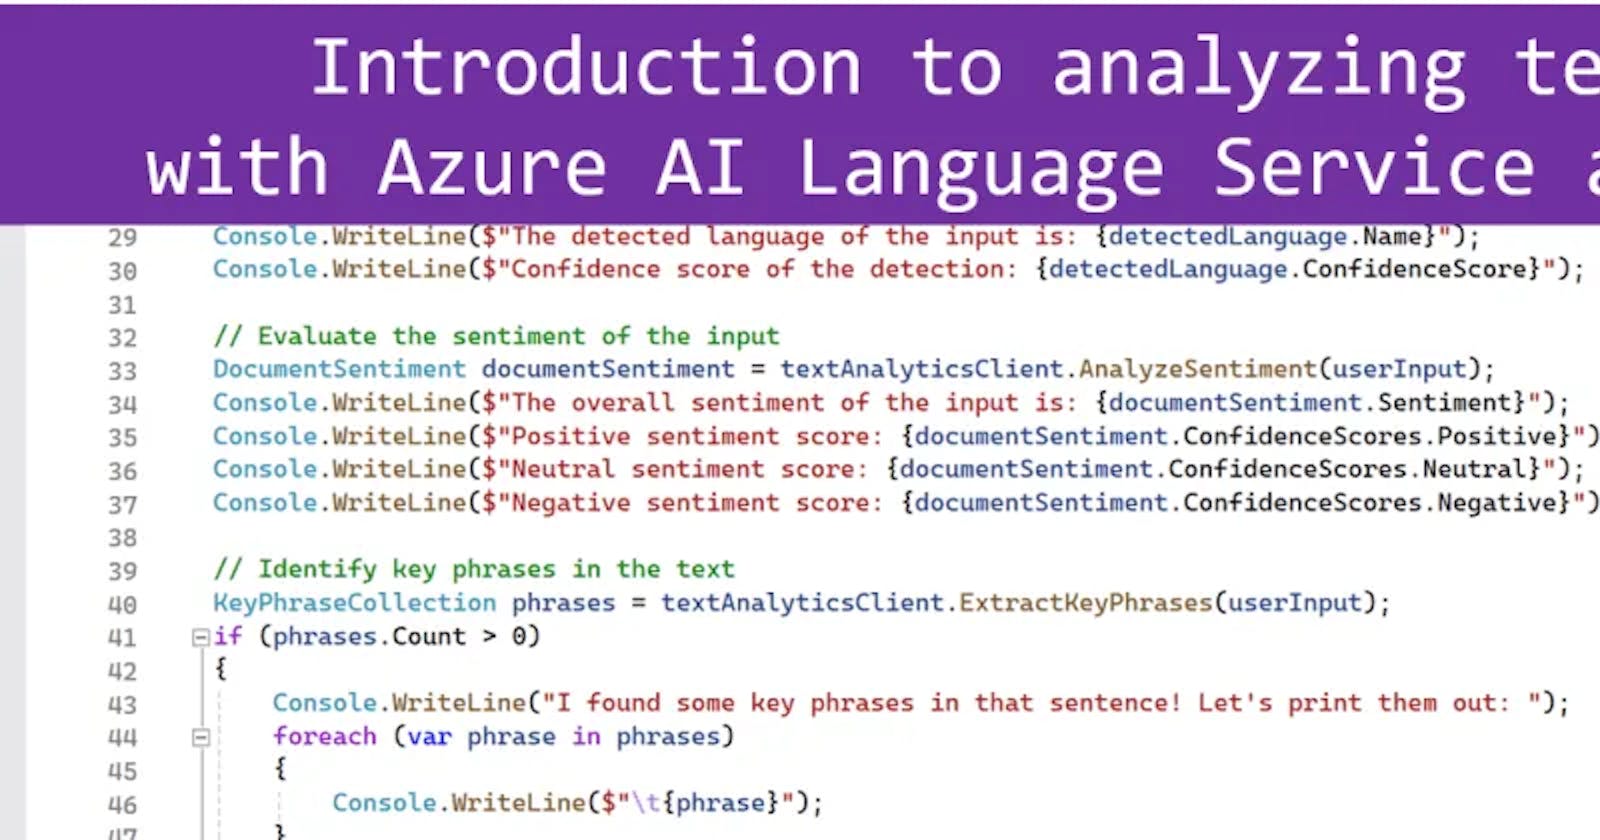 Introduction to analyzing text with Azure AI Language Service and C#